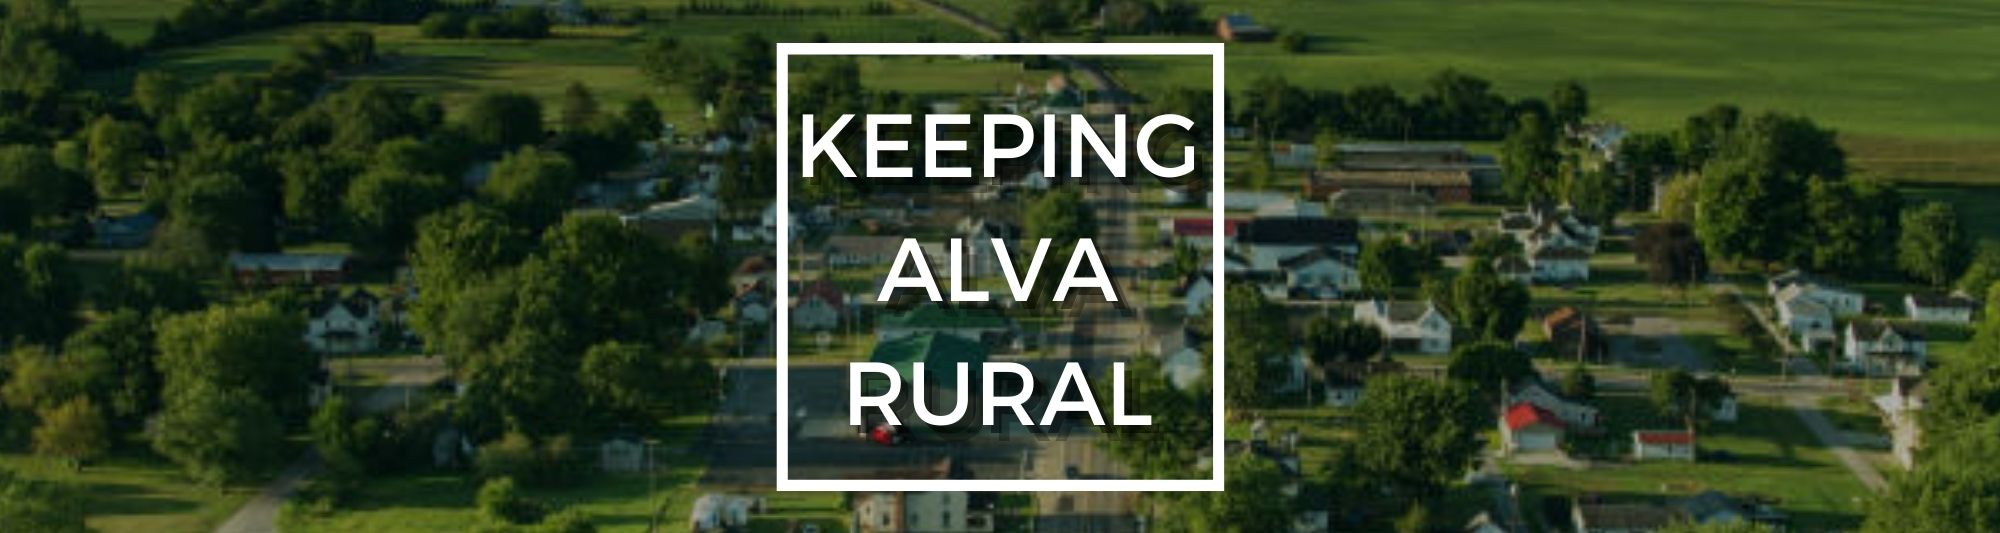 Photo of a rural community with text saying Keeping Alva Rural